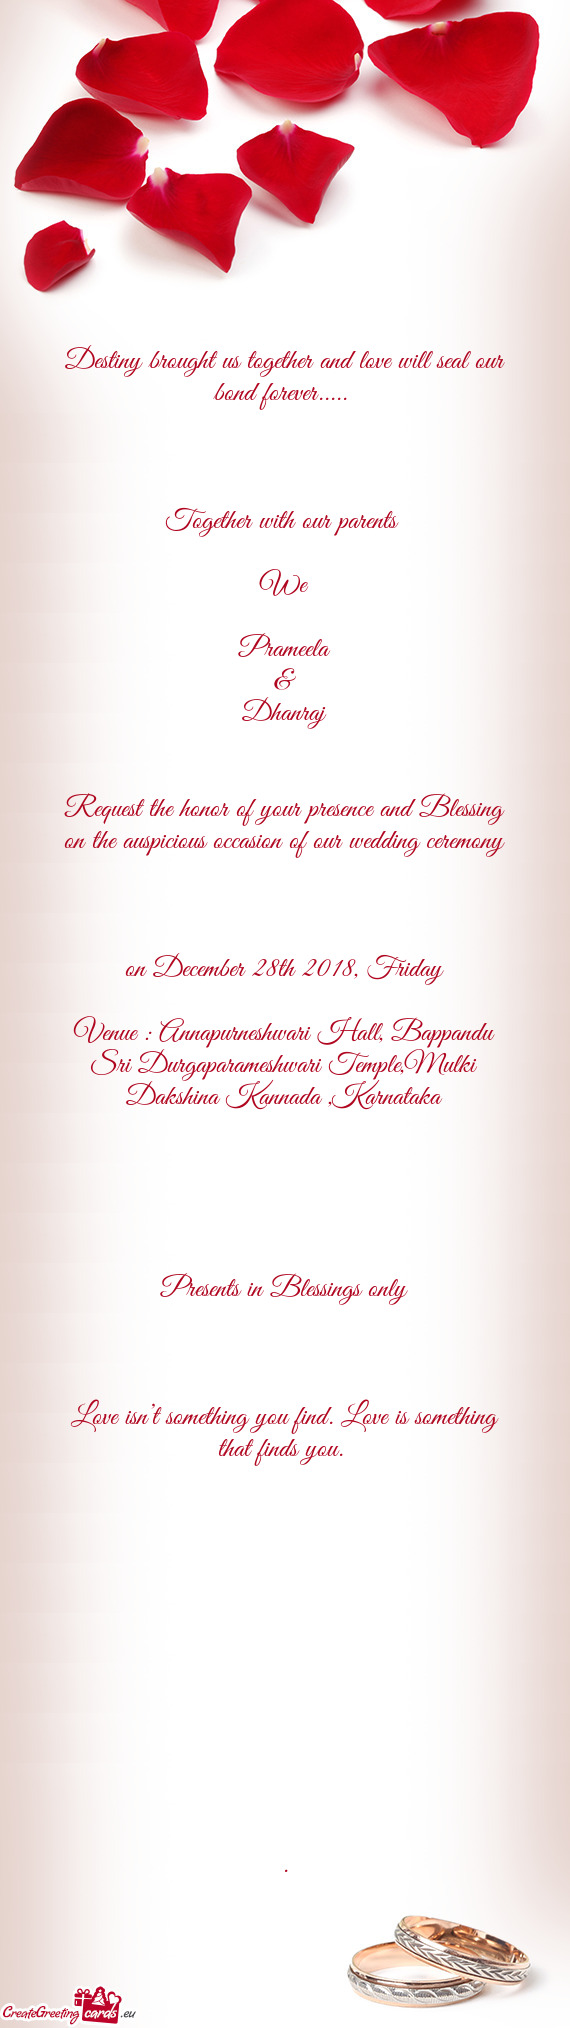 Request the honor of your presence and Blessing on the auspicious occasion of our wedding ceremony